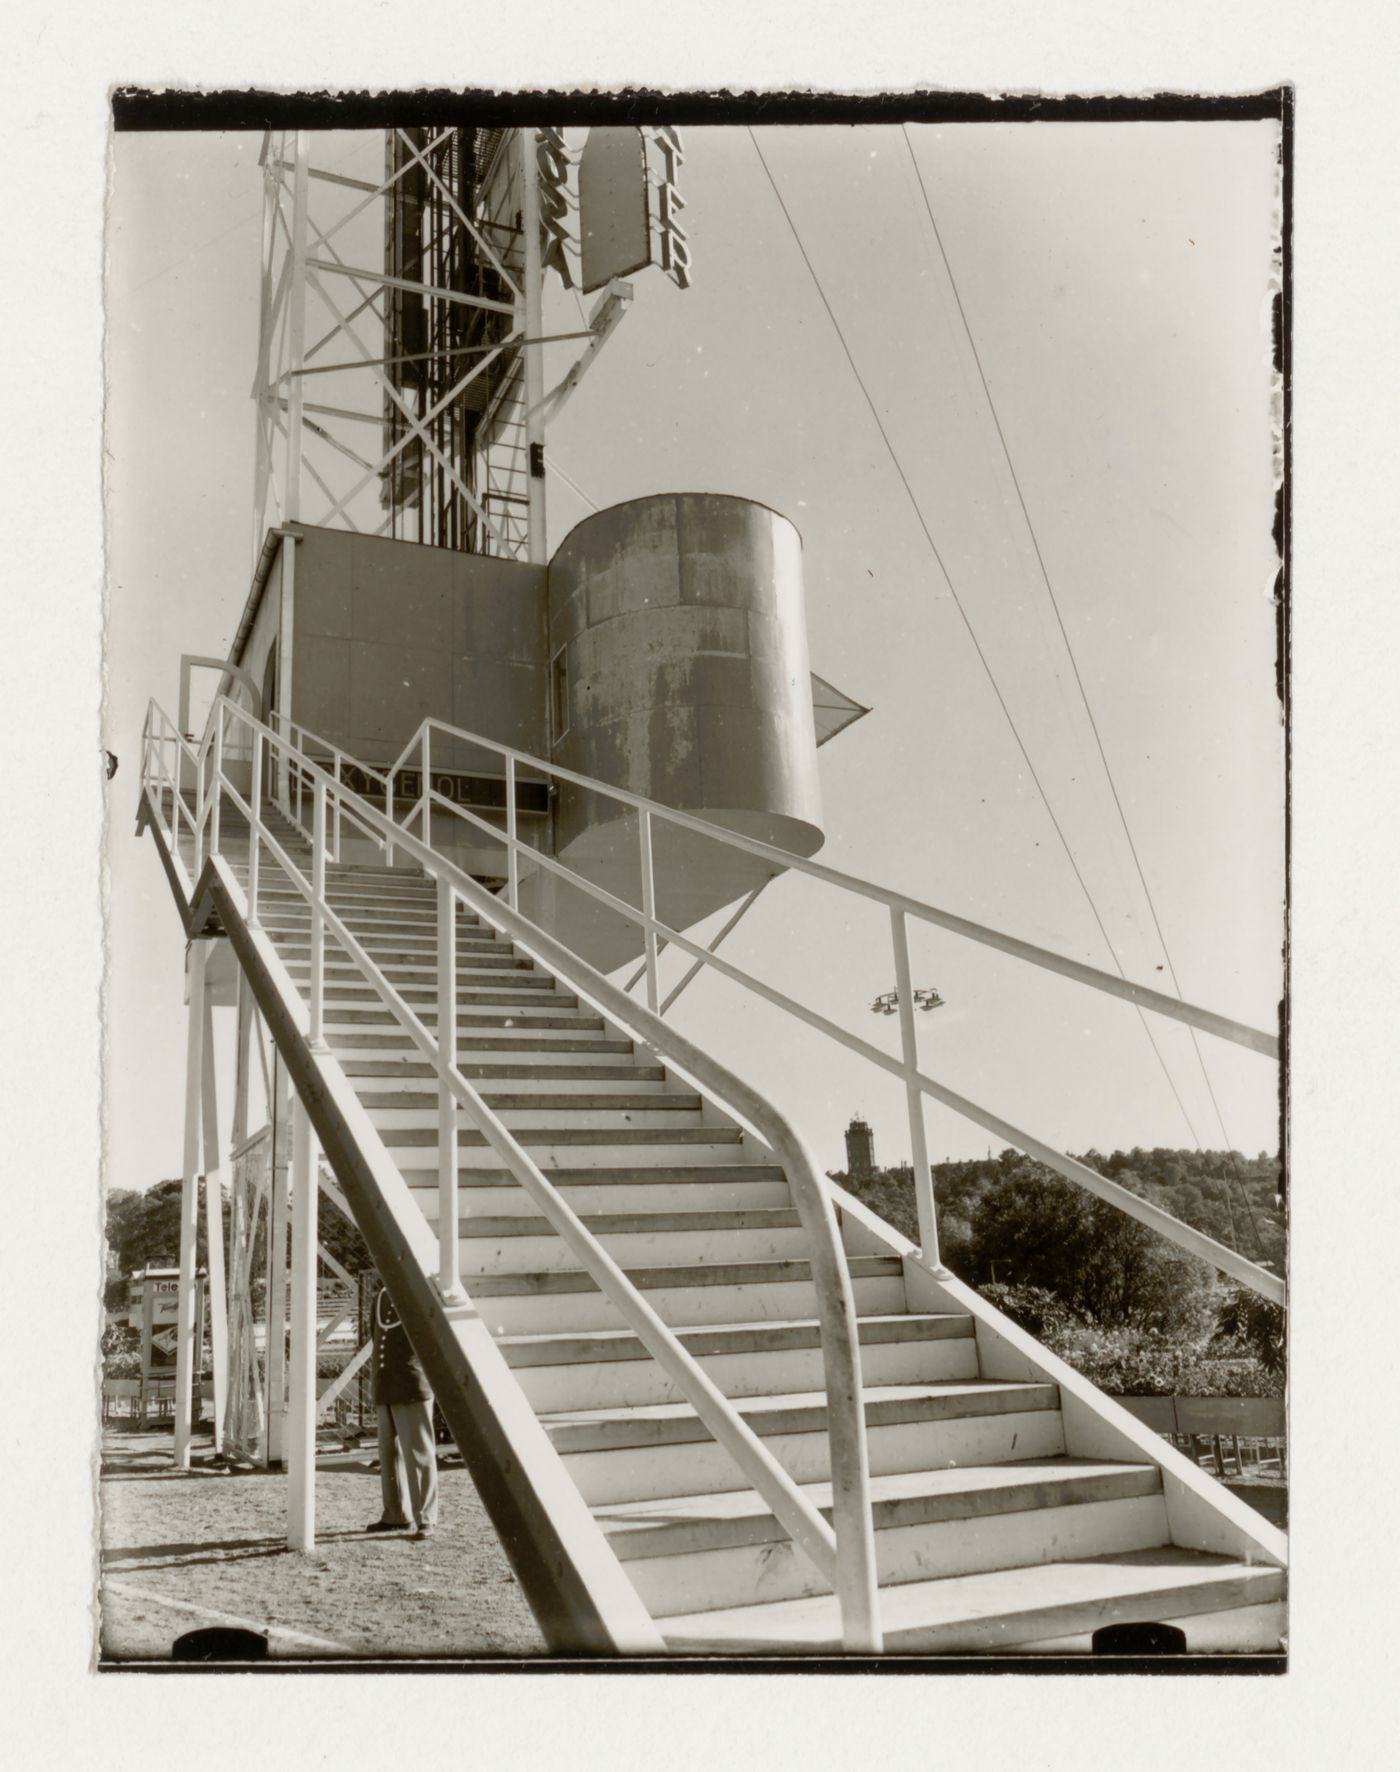 Exterior view of the base of the advertising mast at the Stockholm Exhibition of 1930 showing the stairs, Stockholm